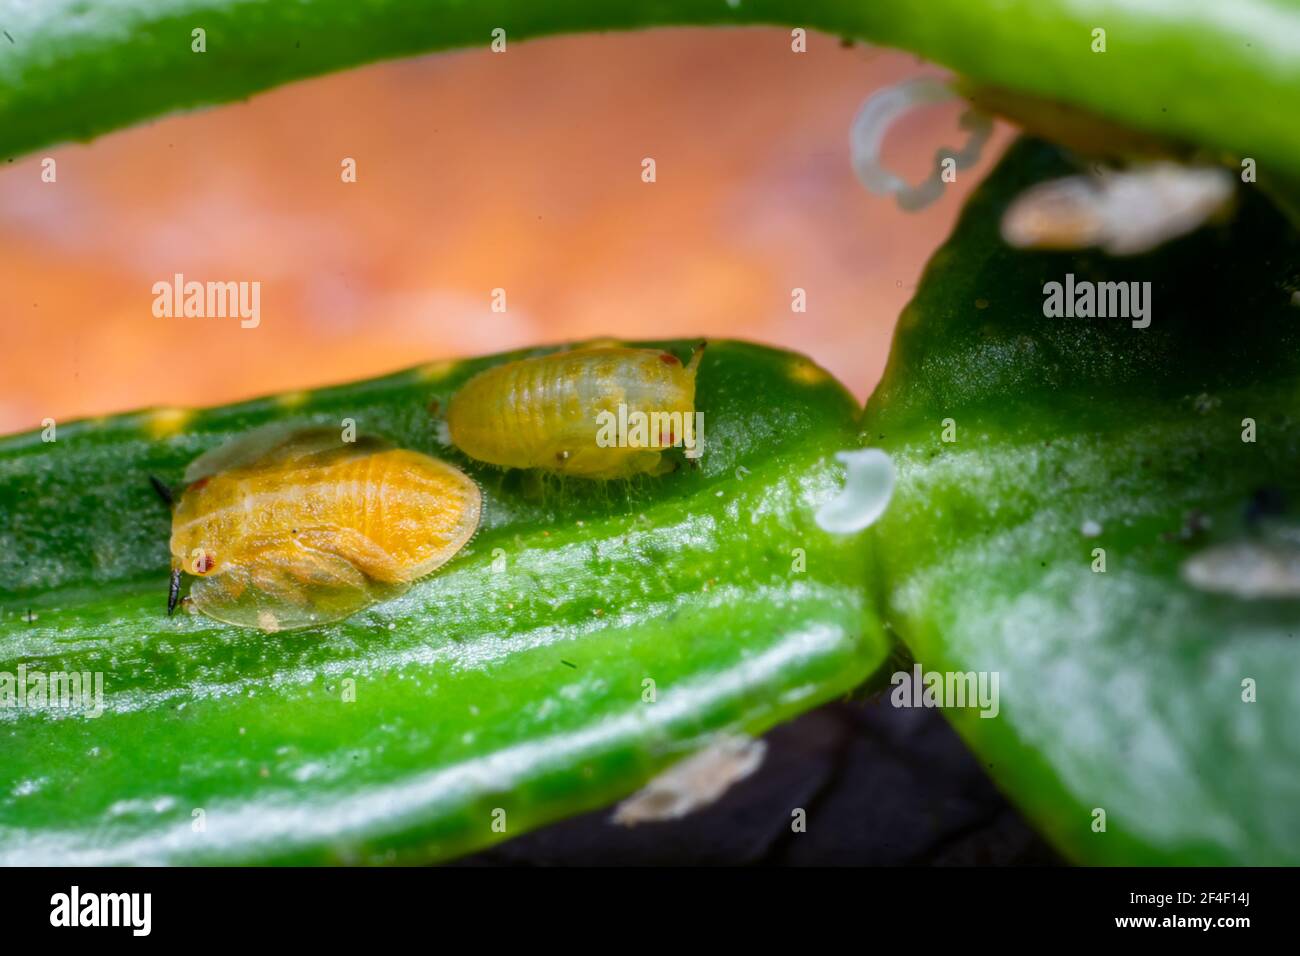 Nymphs of Asian citrus psyllid Diaphorina citri commonly known as citrus psyllais widely distributed important insect pest of citrus as it is a vector Stock Photo